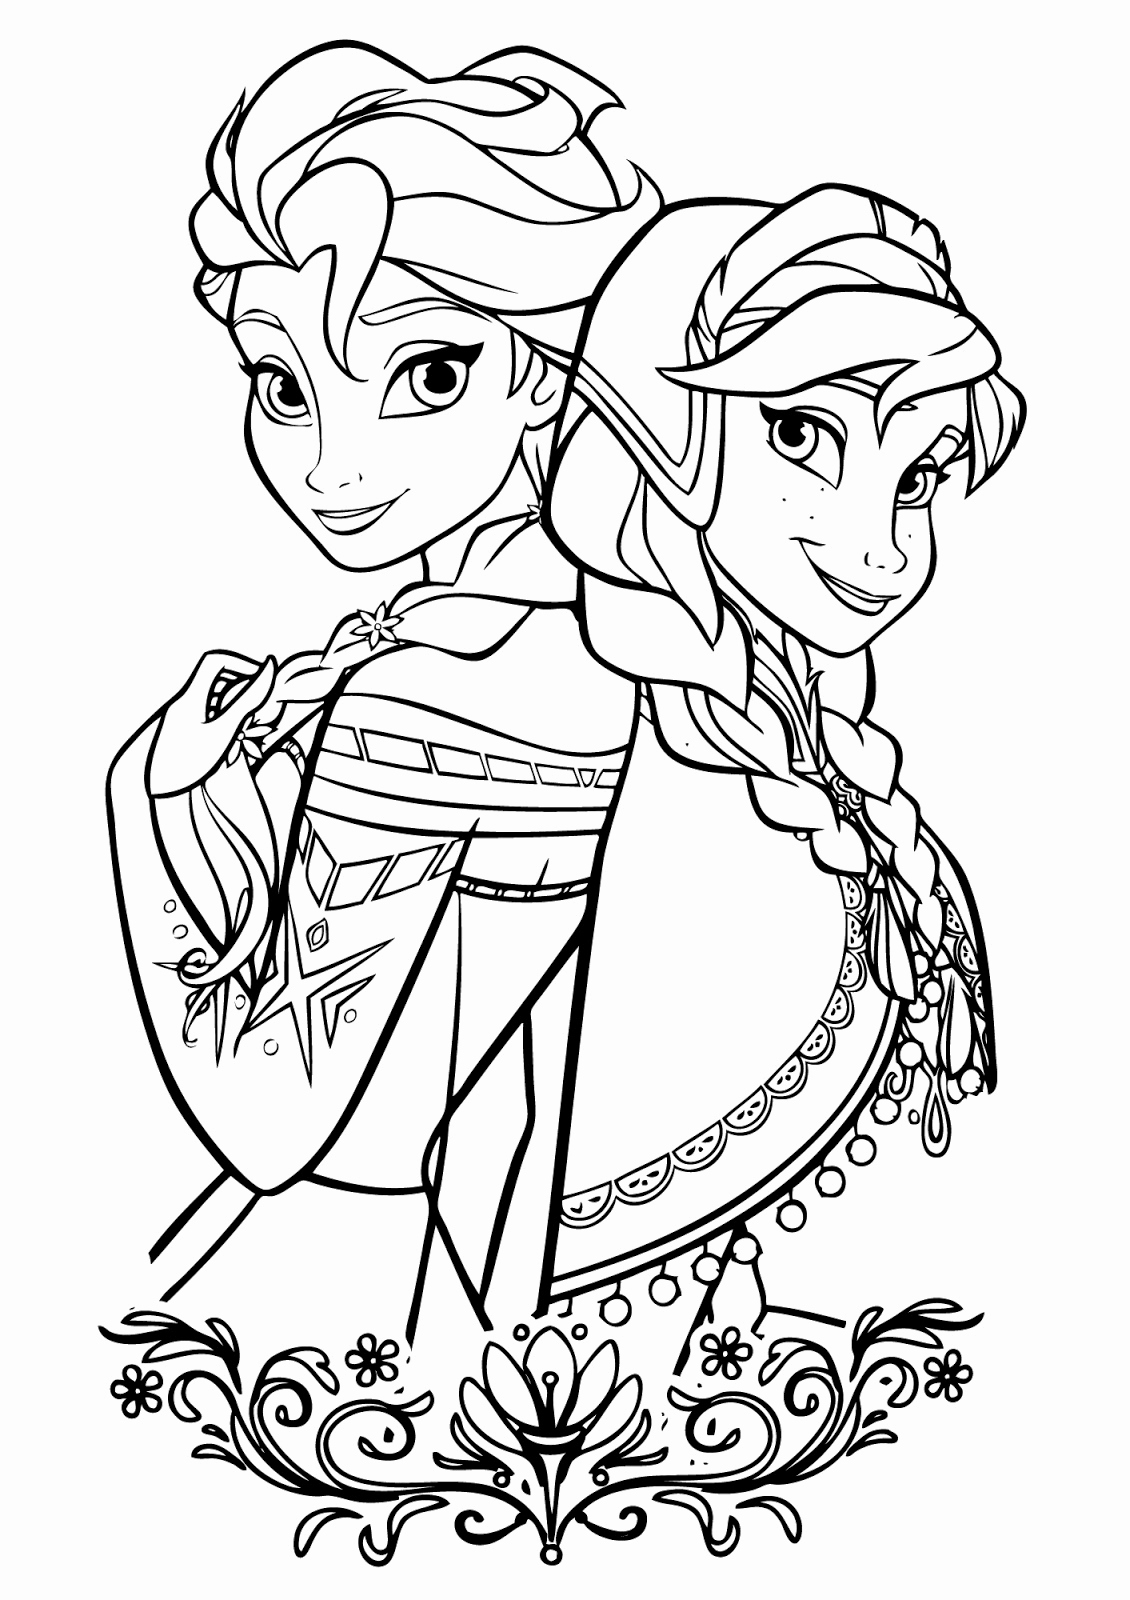 Frozen Characters Coloring Pages at GetColorings.com | Free printable